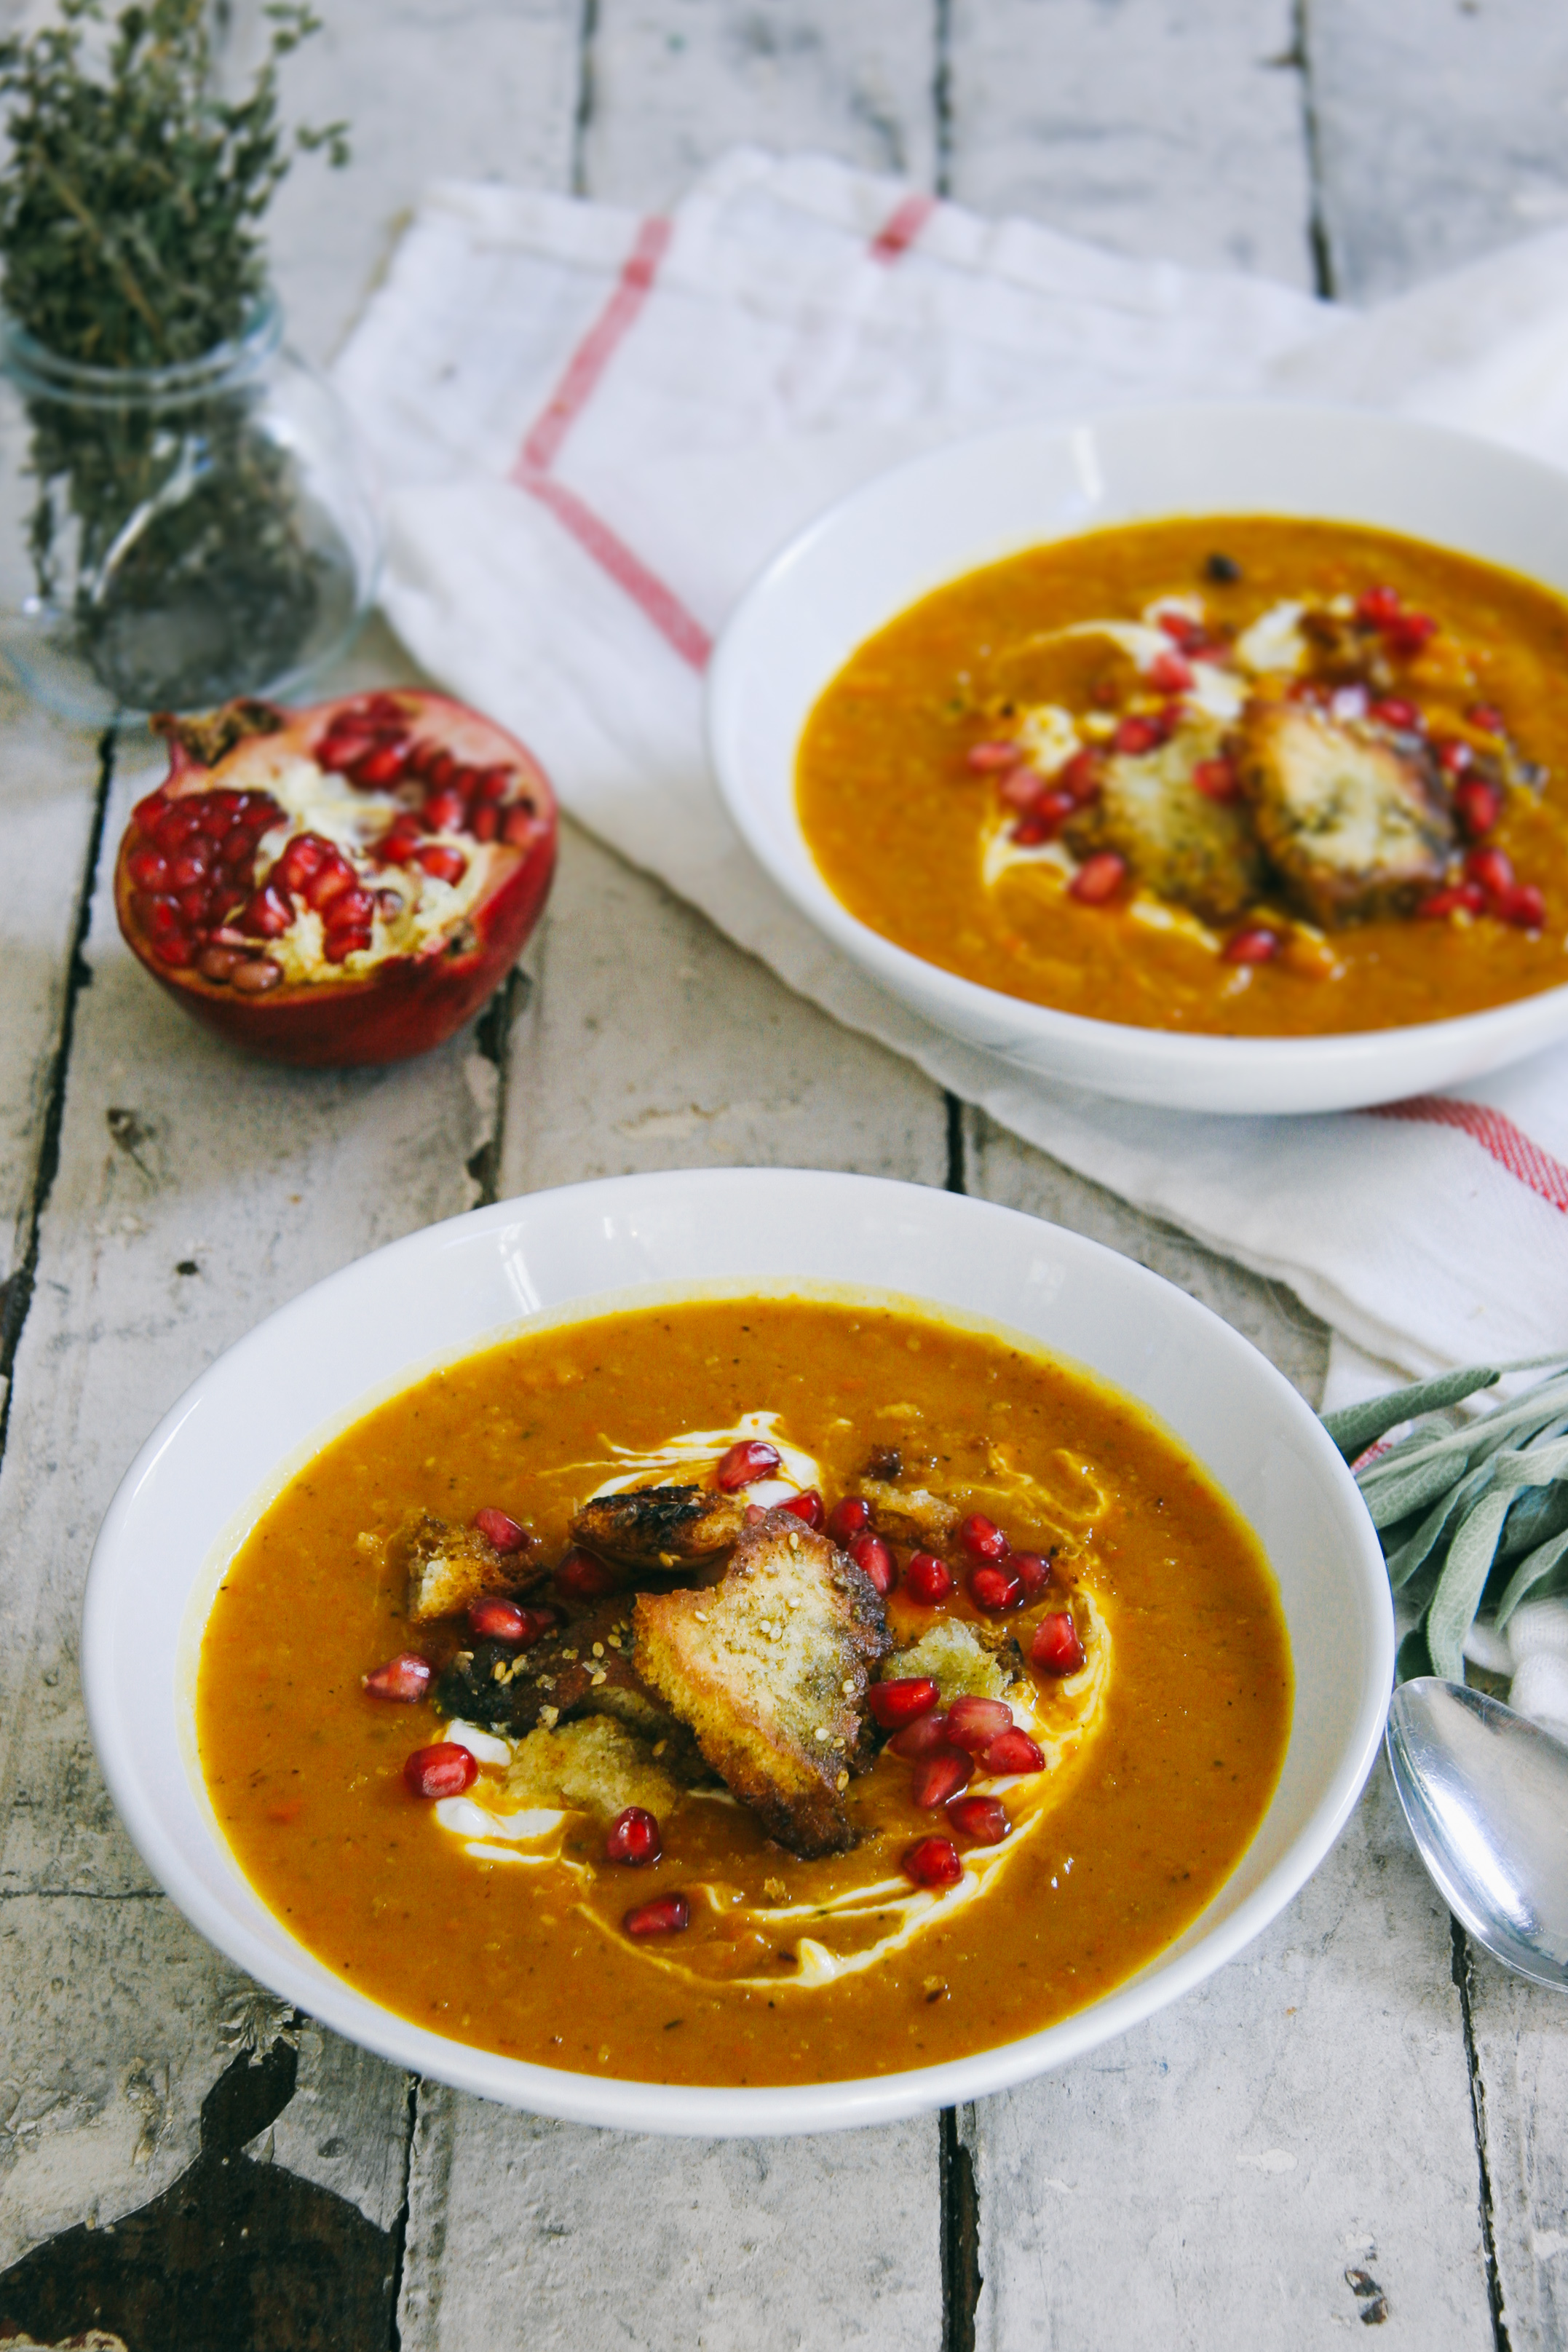 Roasted Butternut Squash Soup with Za'atar Pita Croutons | I Will Not Eat Oysters